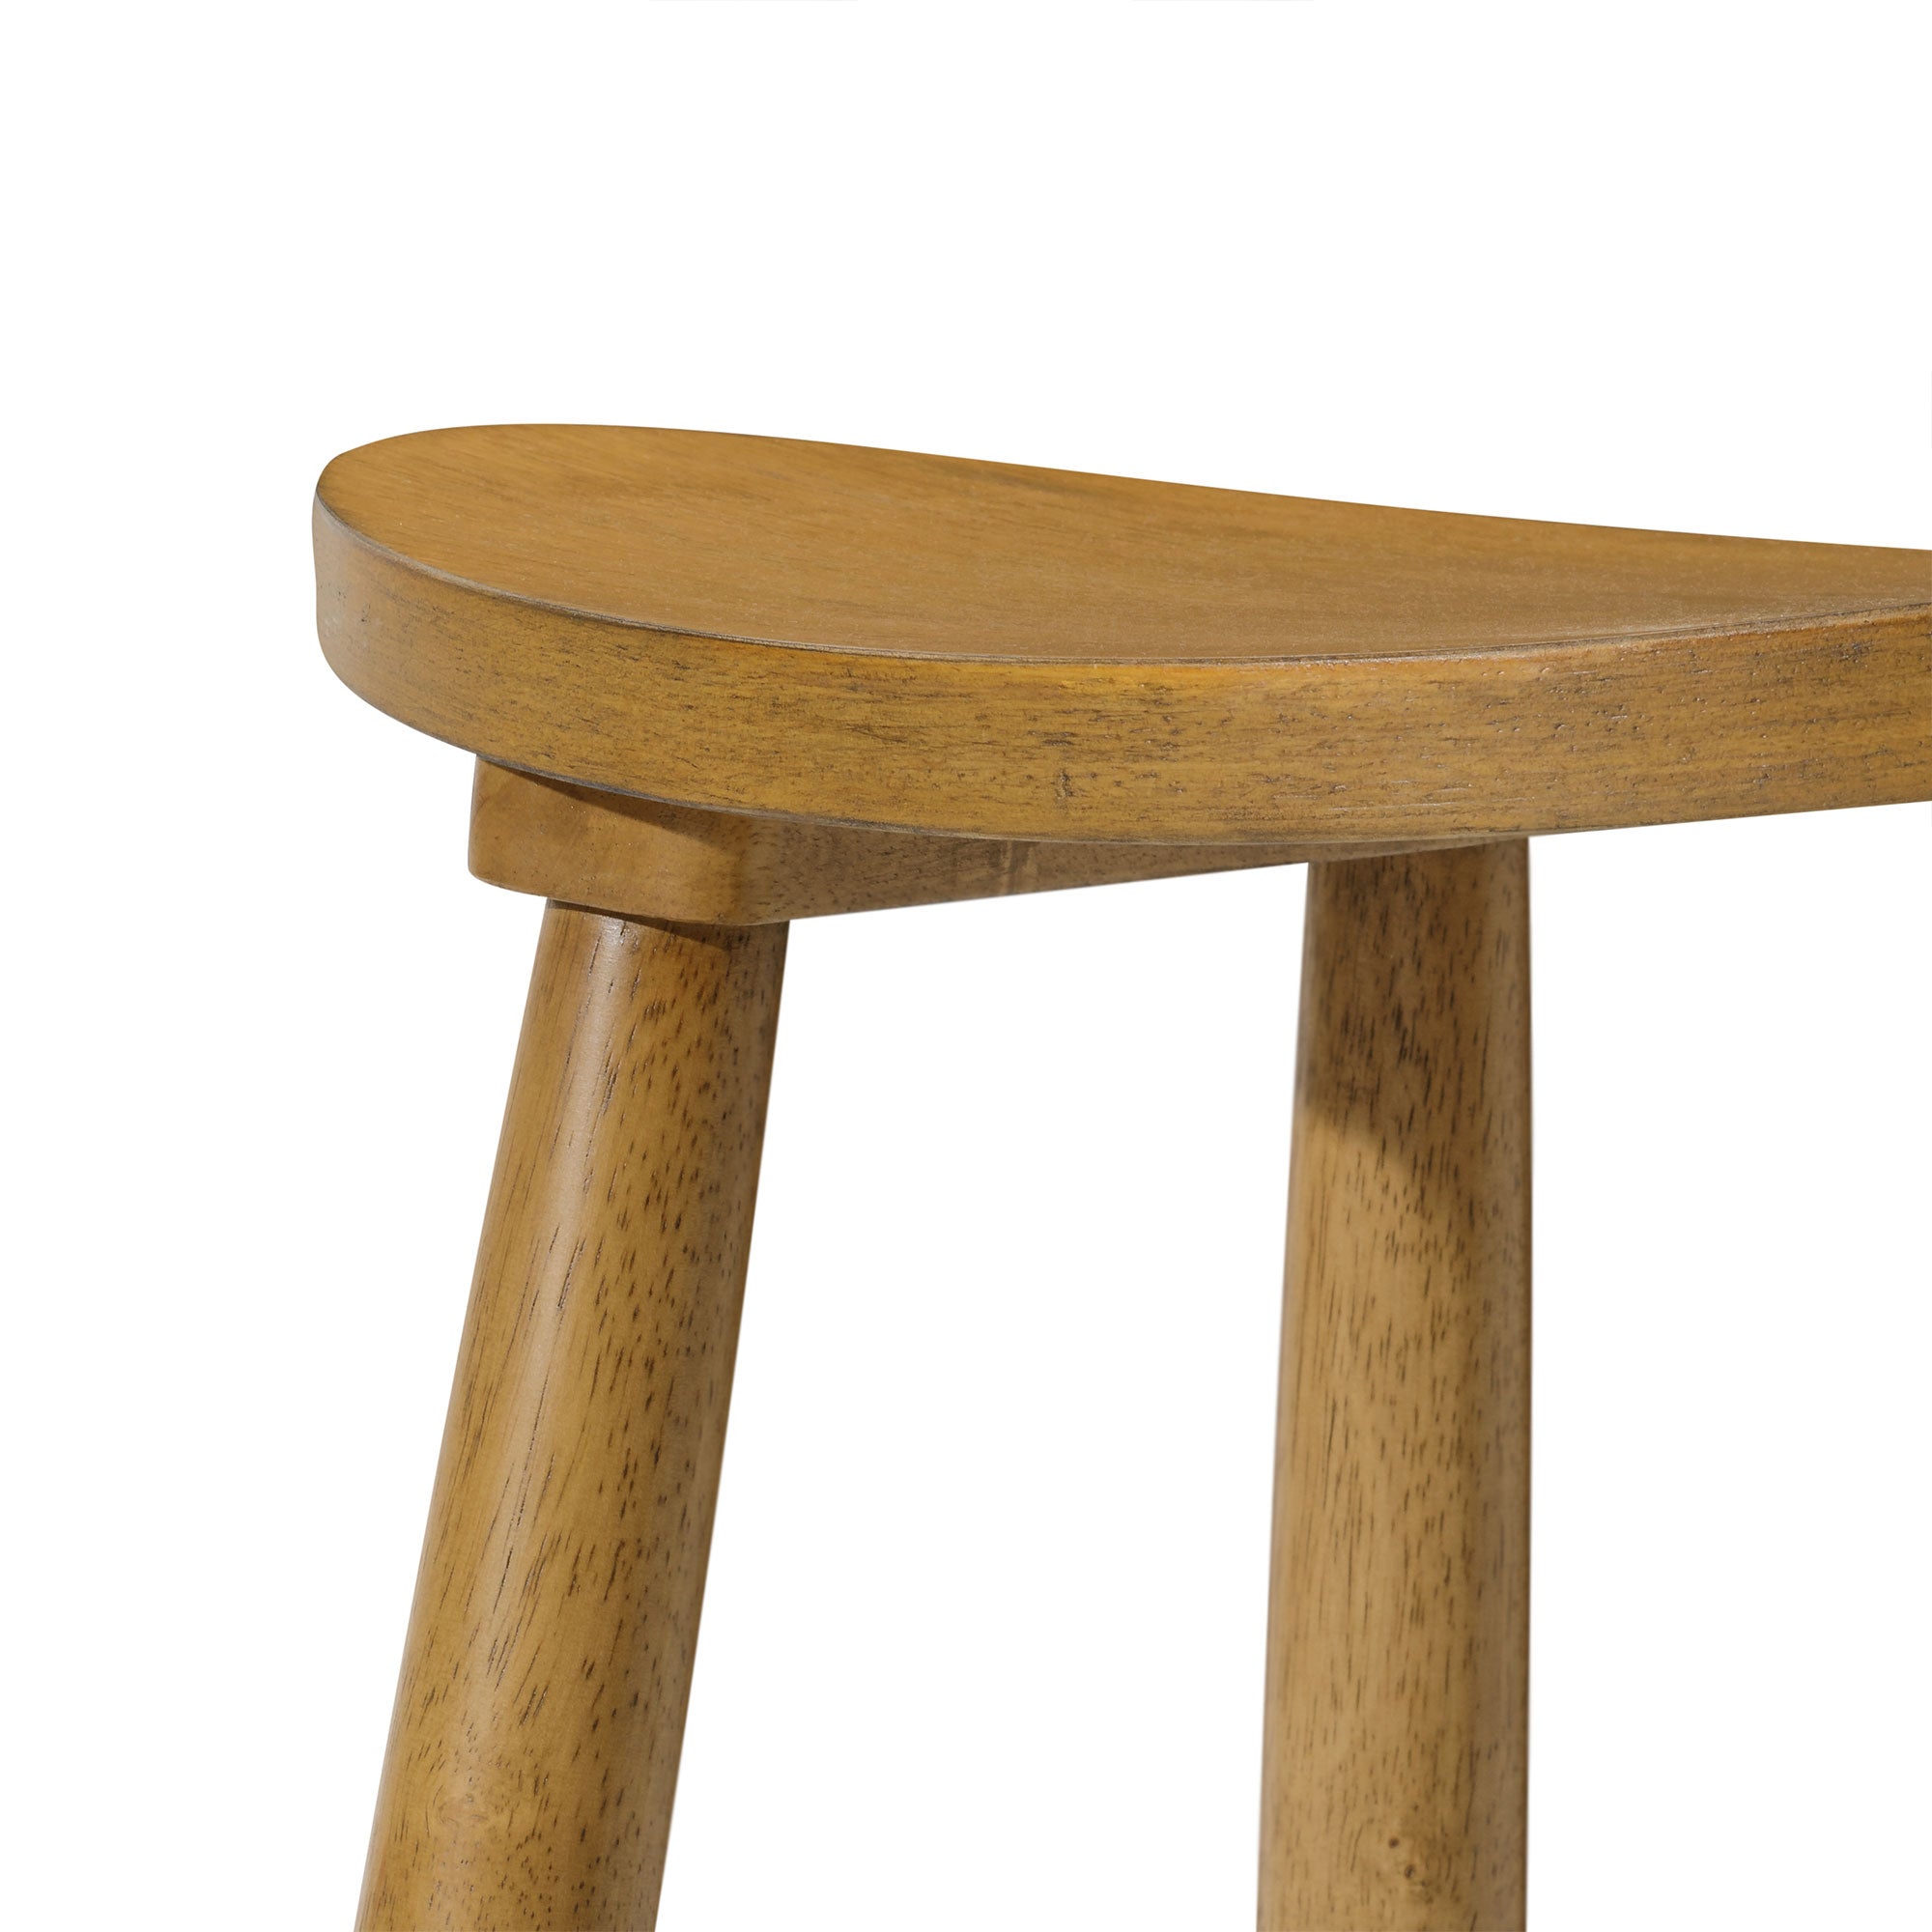 Luna Bar Stool in Rustic Natural Wood Finish in Stools by Maven Lane